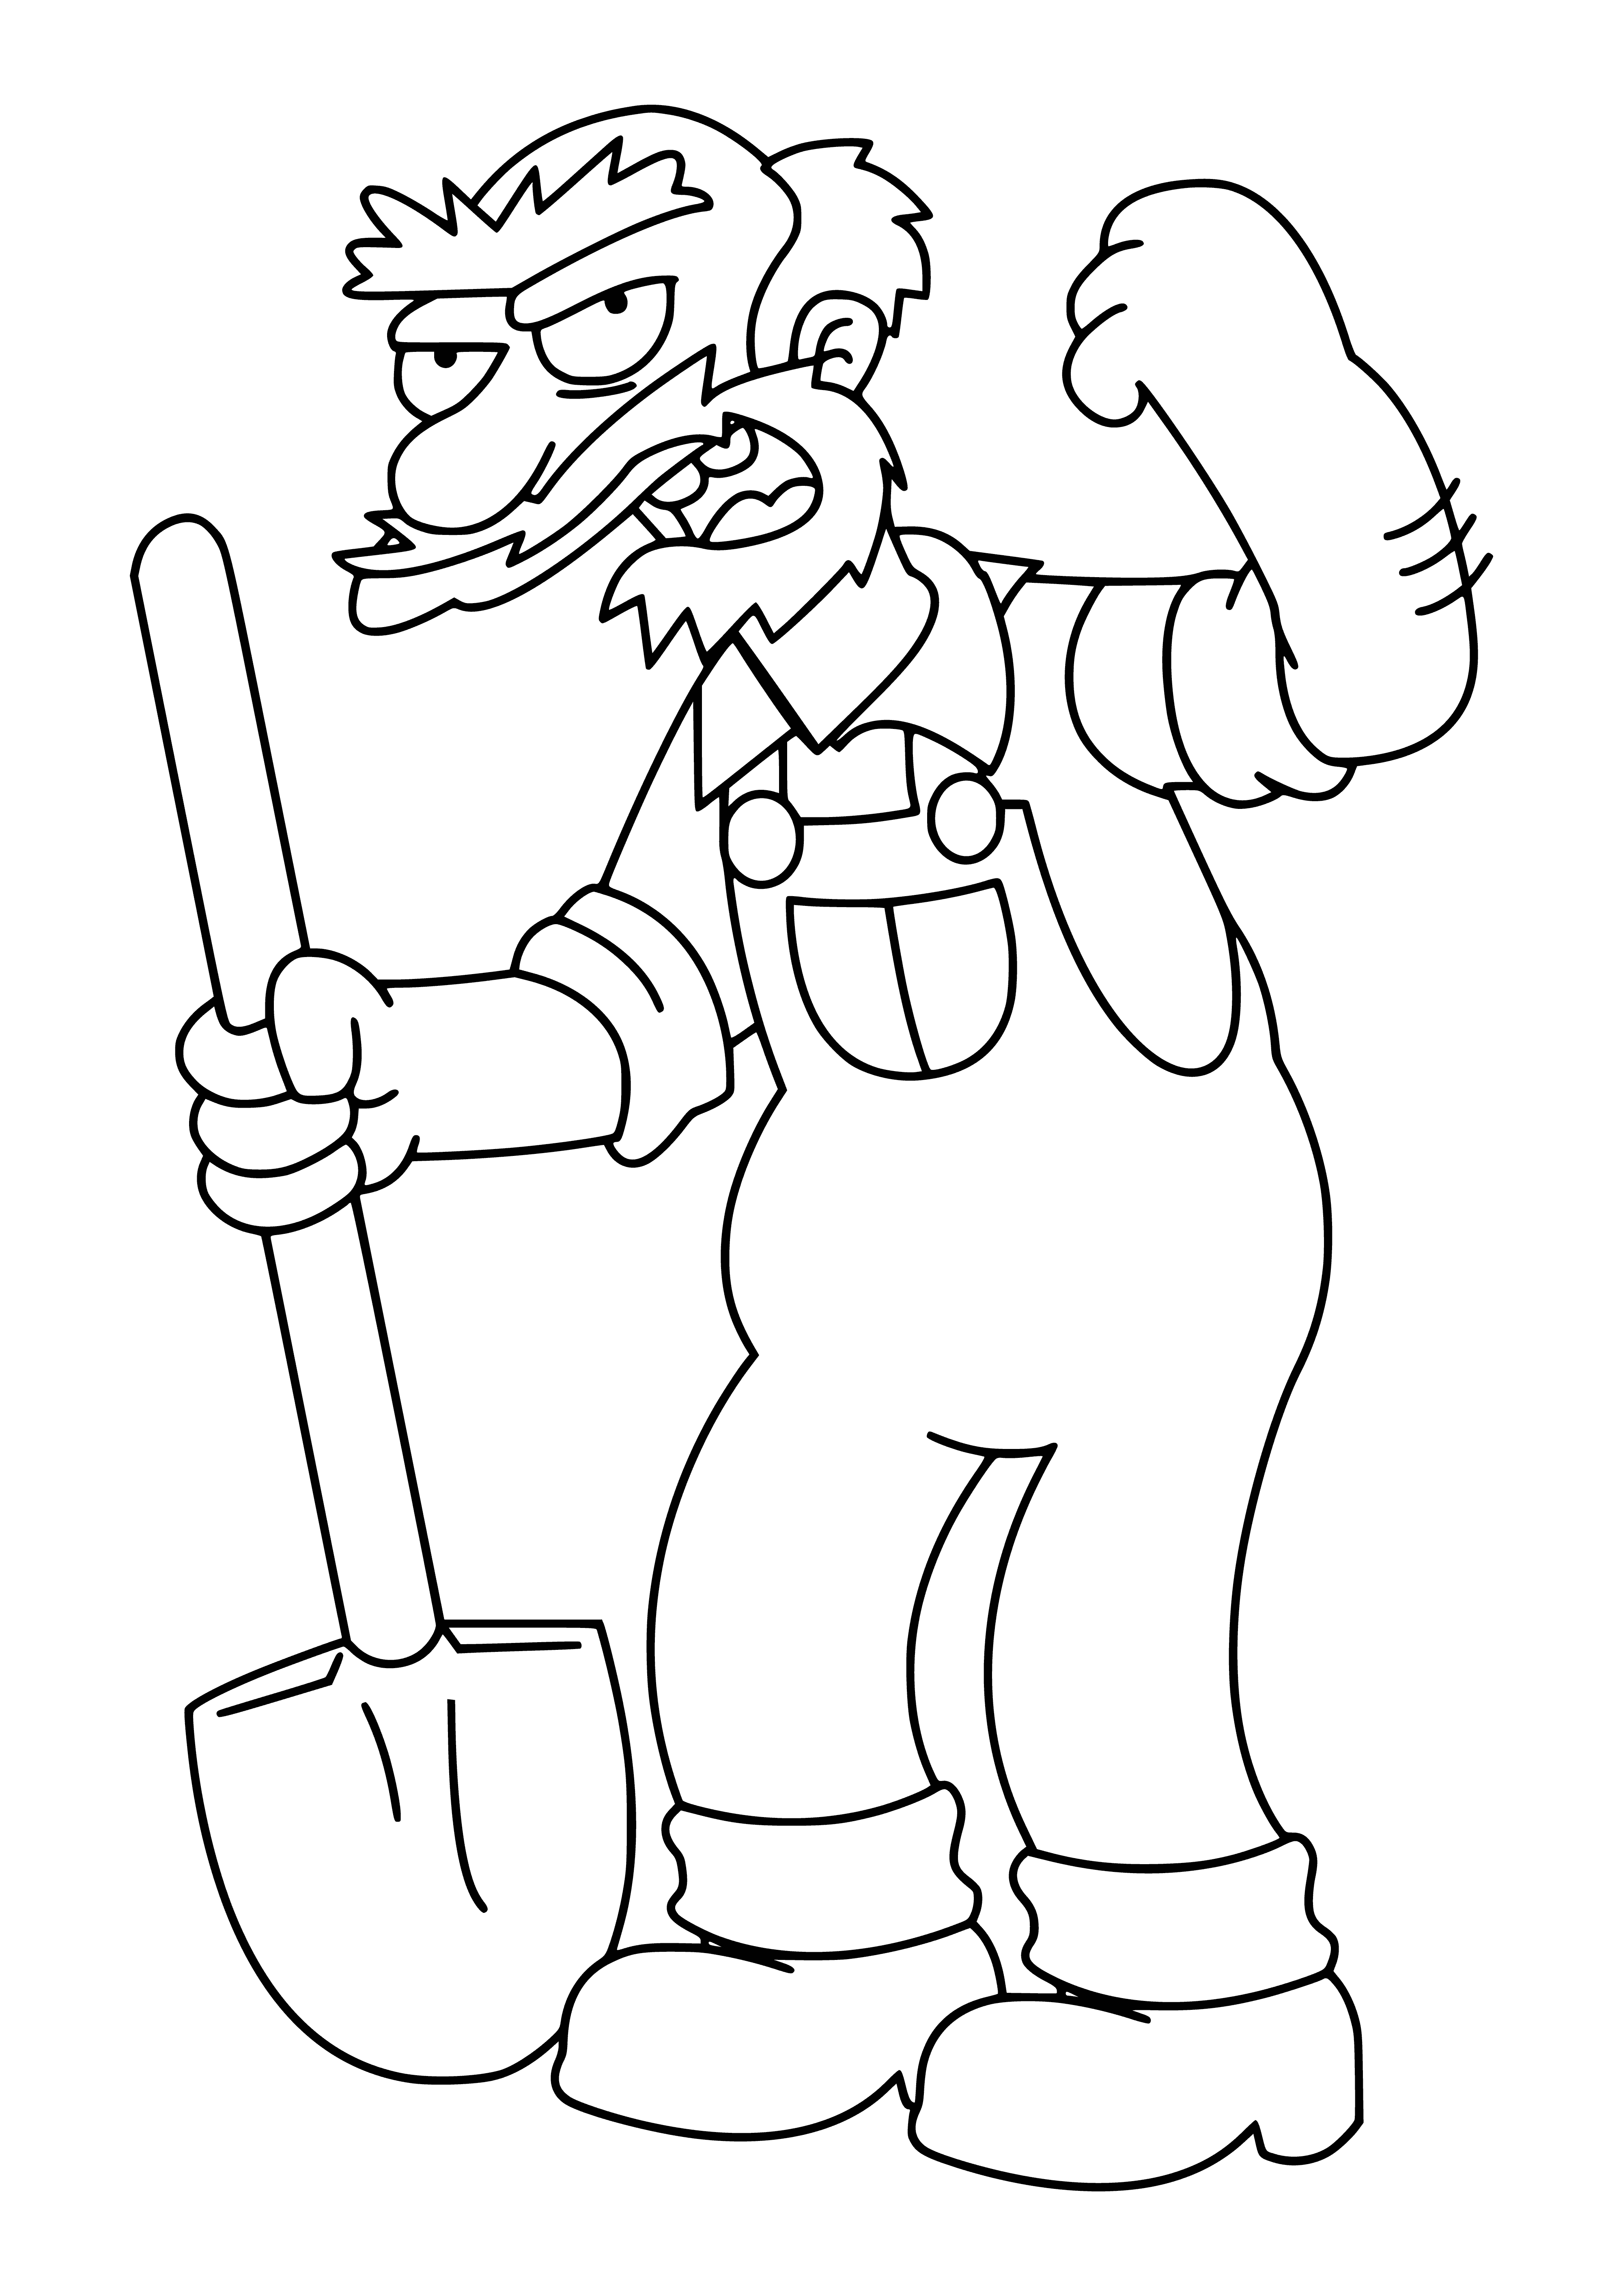 coloring page: Willie the gardener is the Simpson family's worker with a green shirt, brown pants, bald head, and mustache wielding a rake.